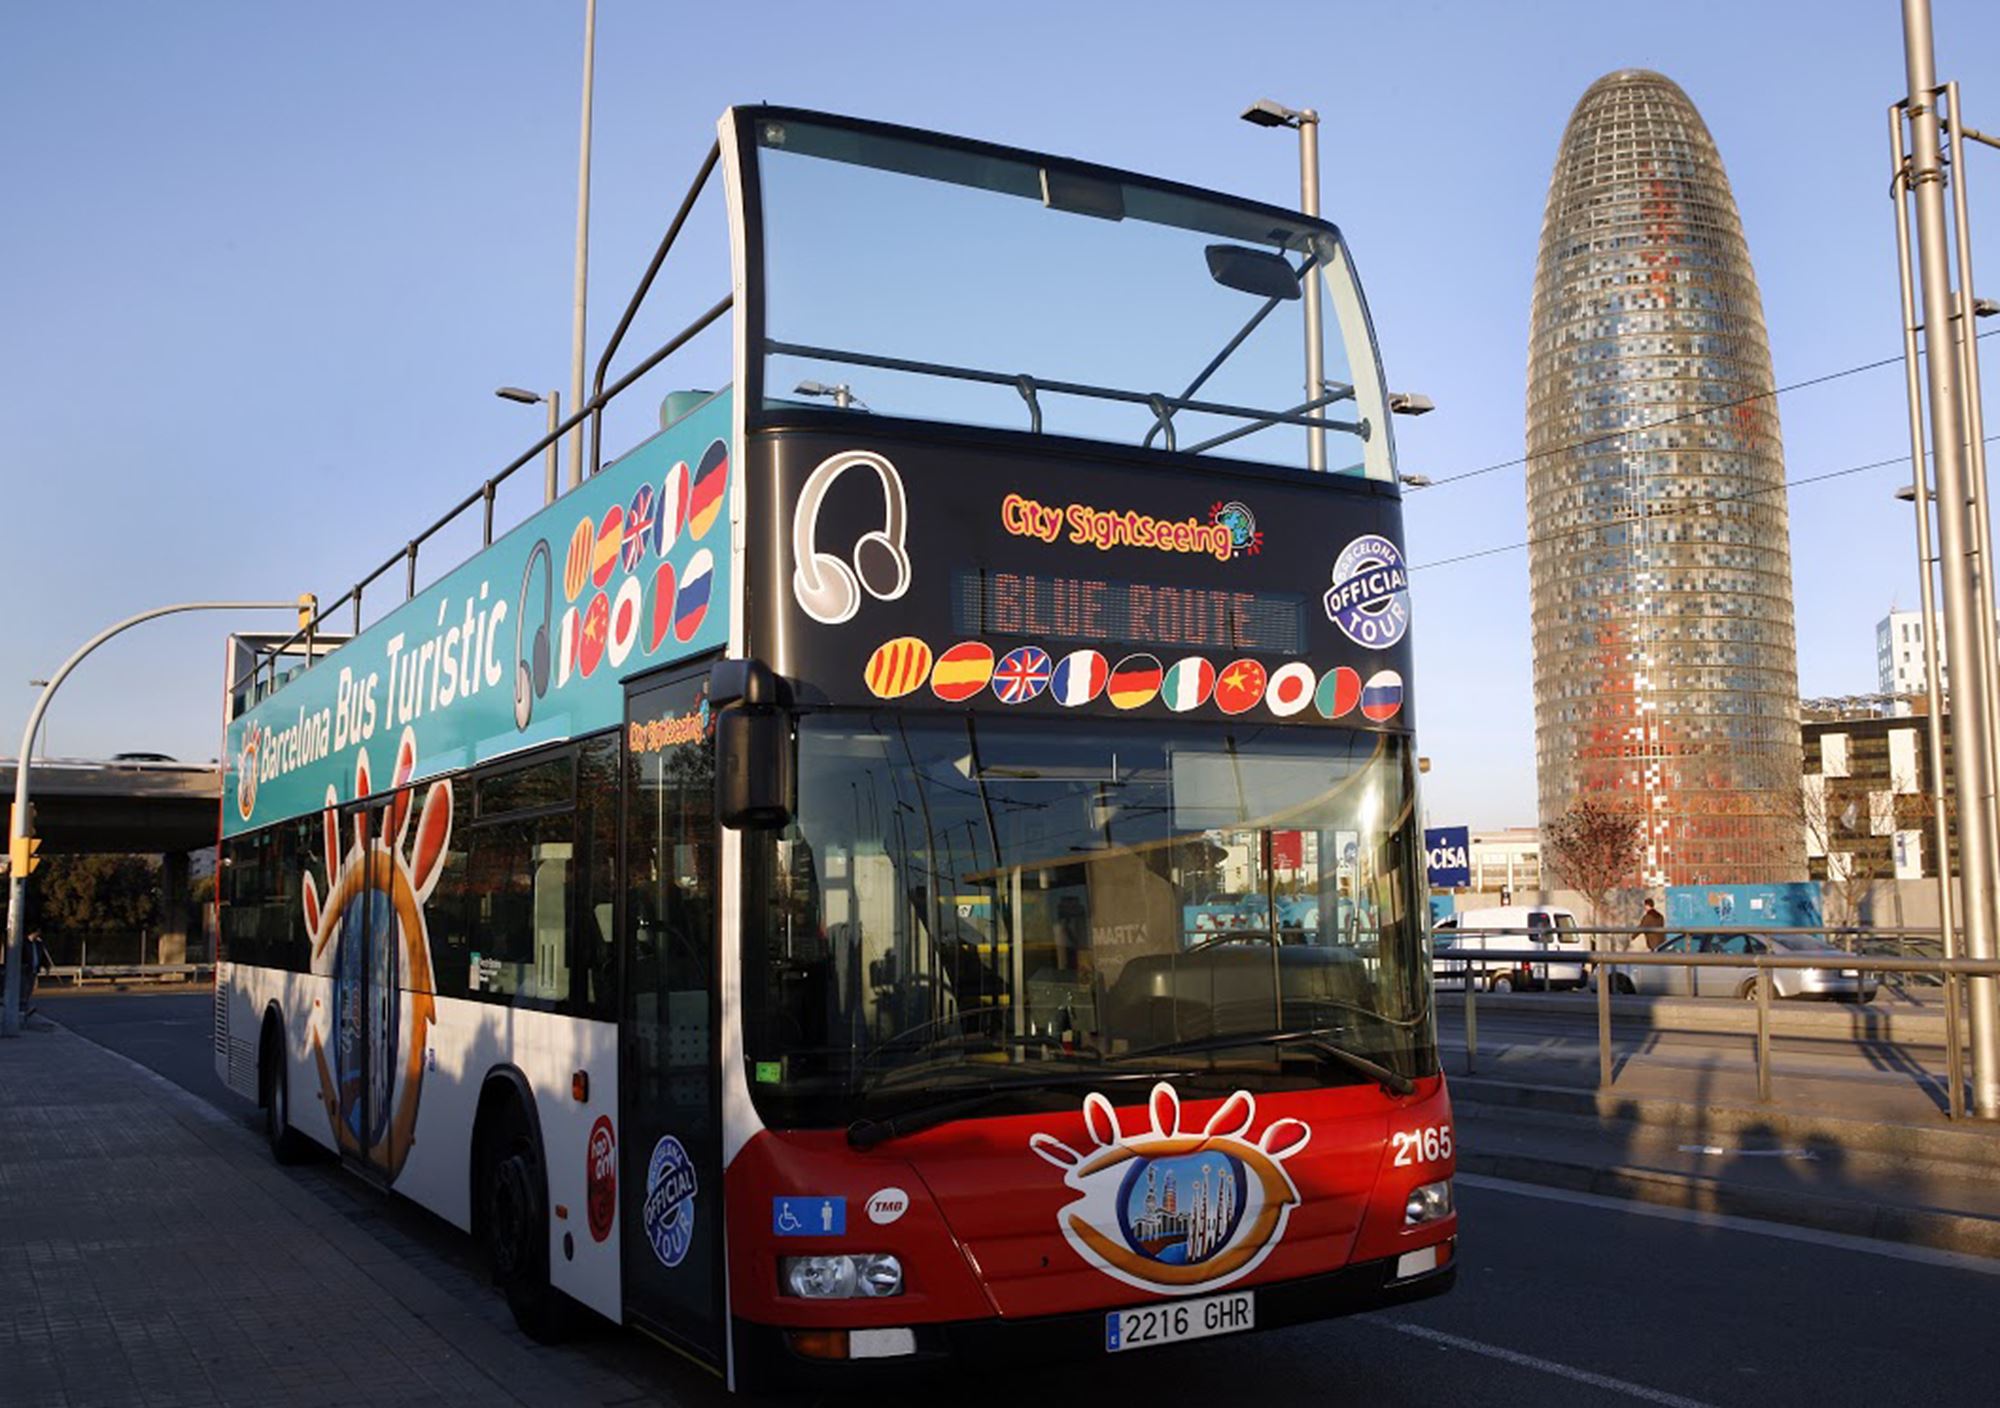 booking tickets visits tours online Tourist Bus City Sightseeing Barcelona